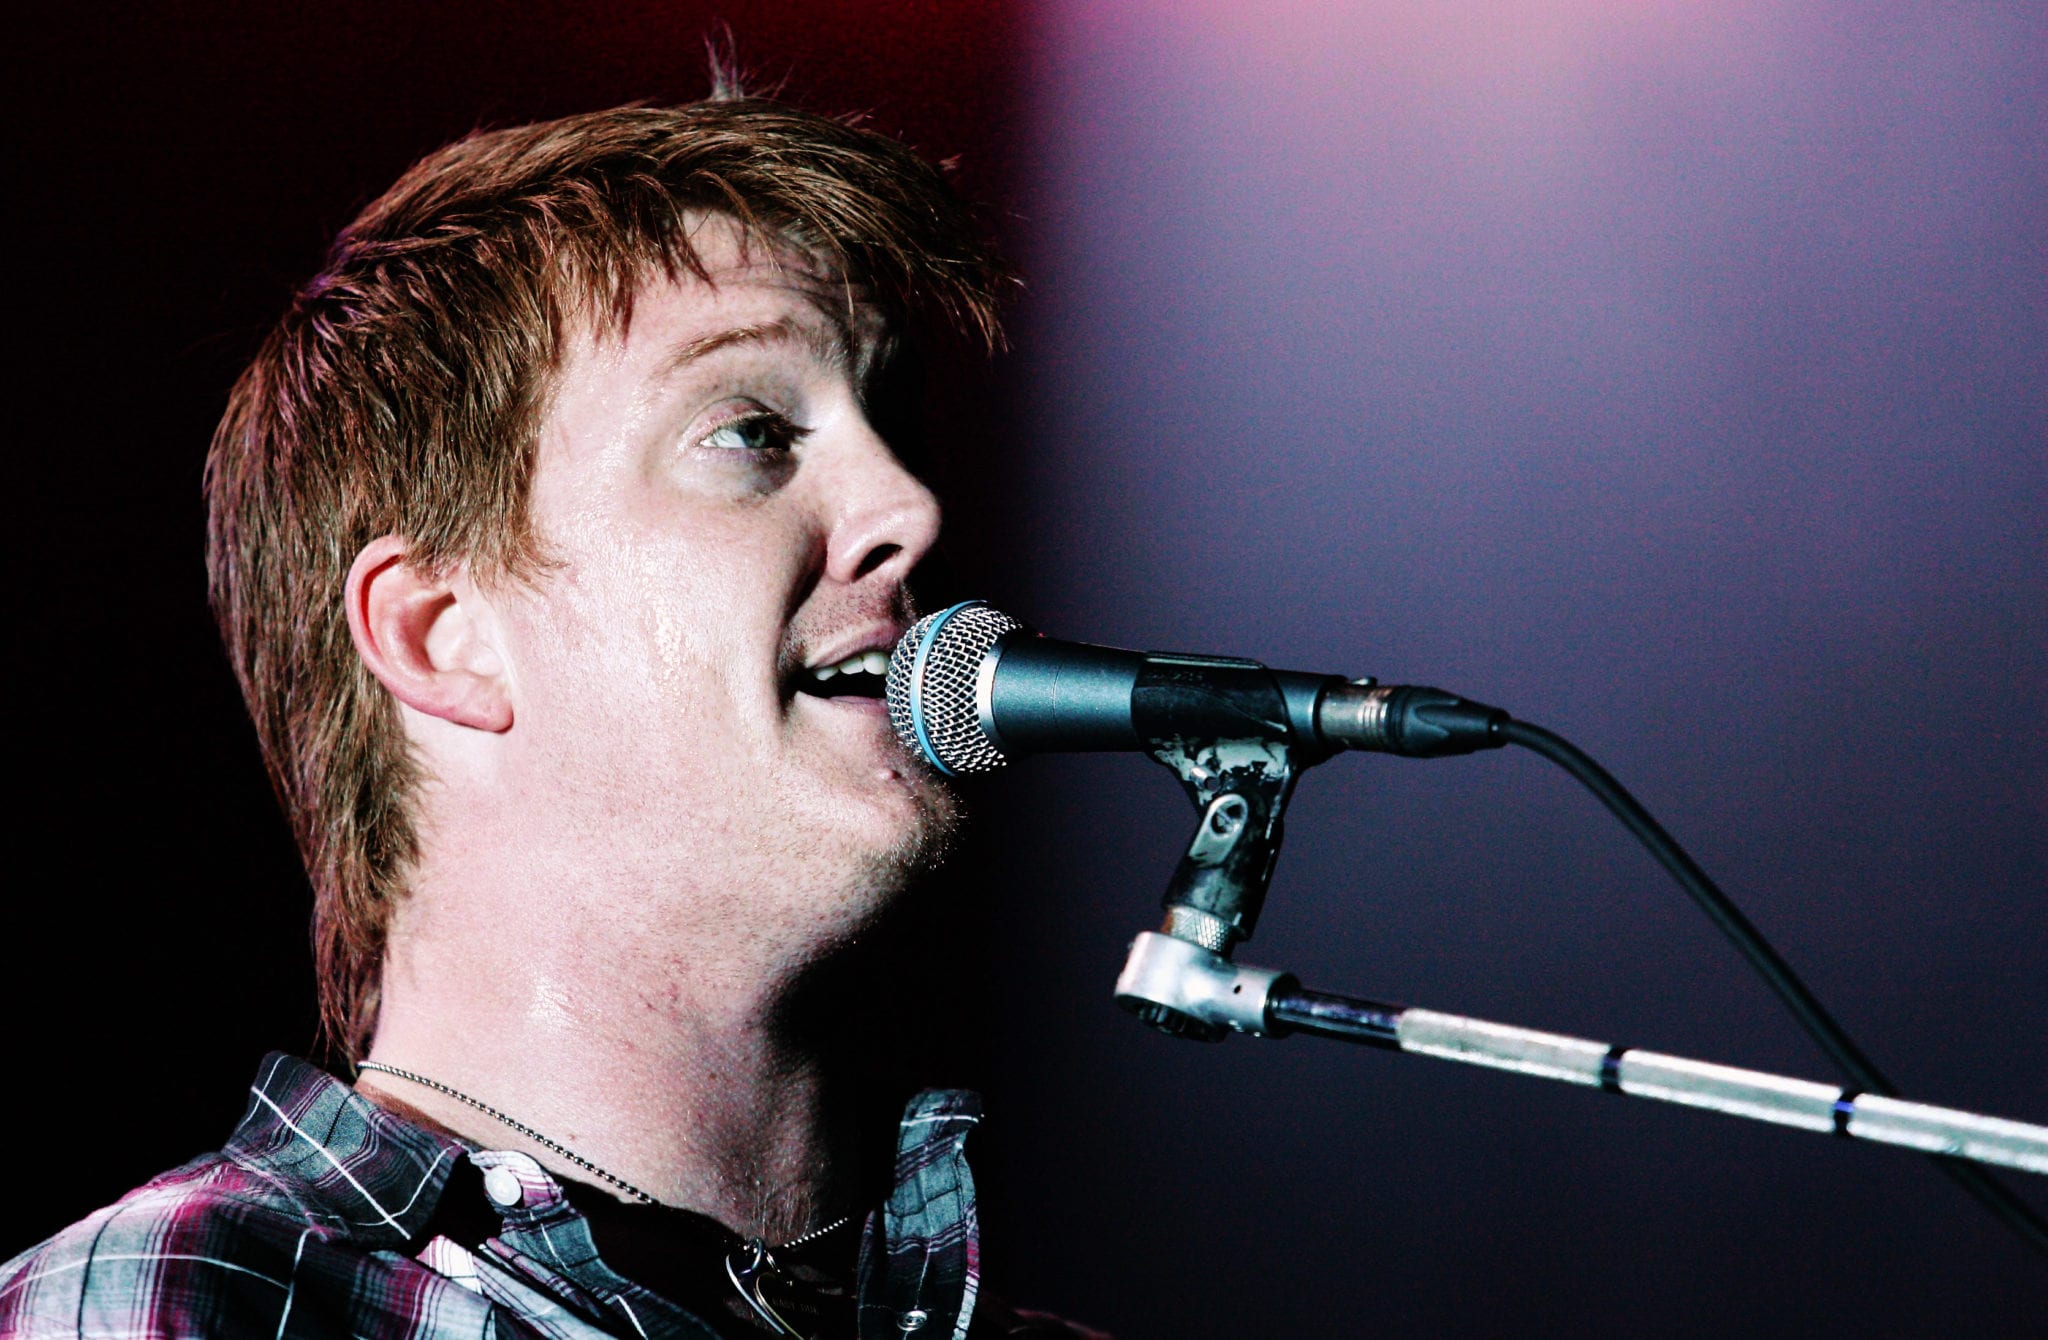 Josh Homme - Queens of the Stone Age